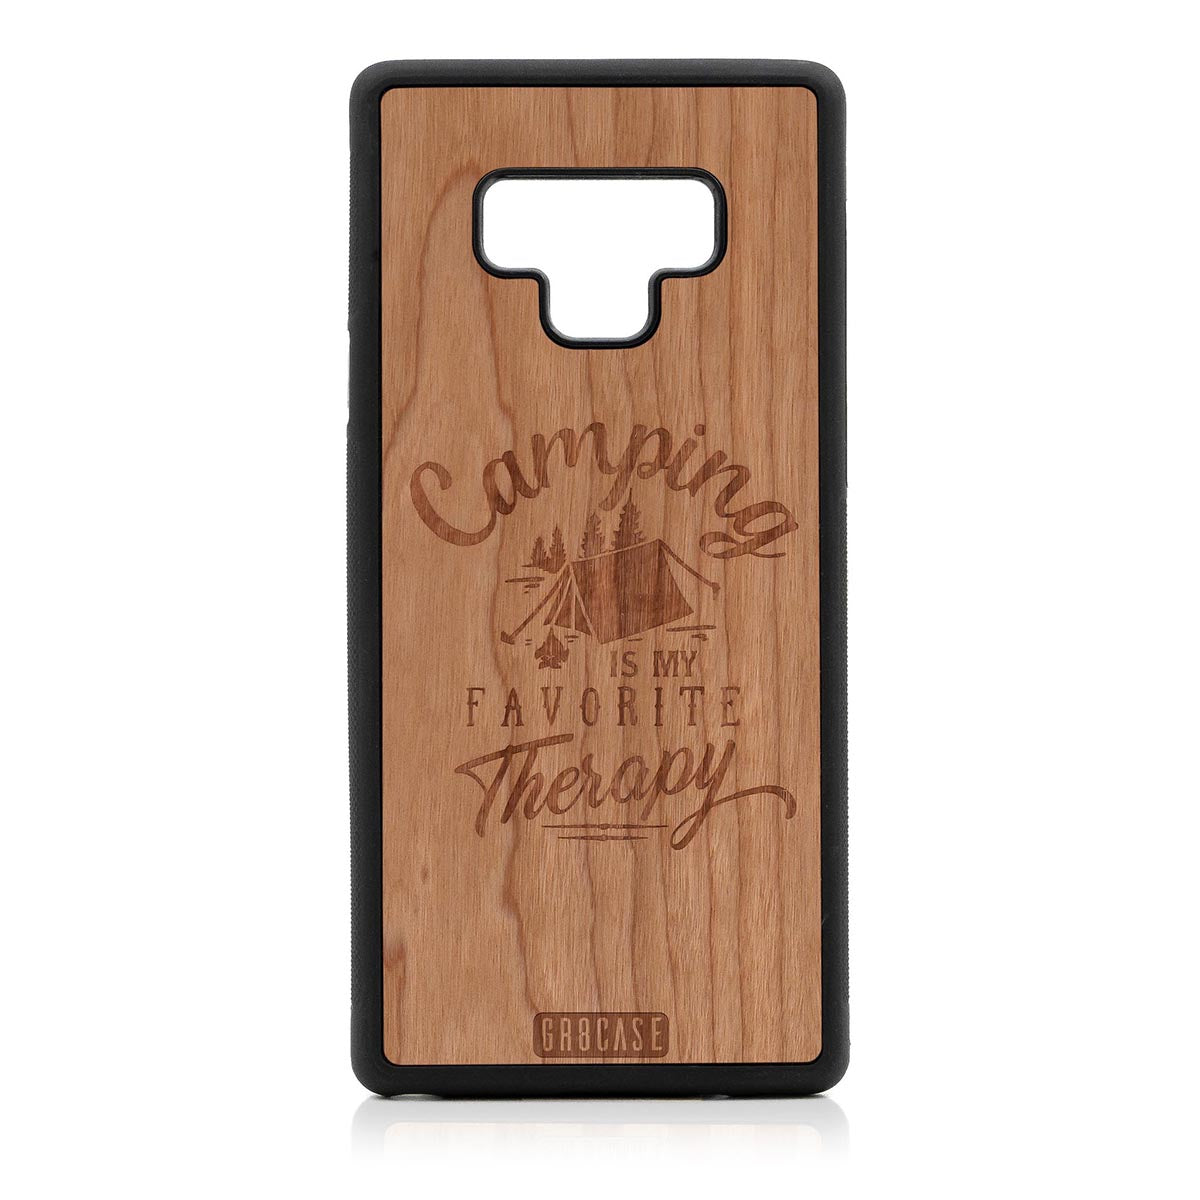 Camping Is My Favorite Therapy Design Wood Case For Samsung Galaxy Note 9 by GR8CASE